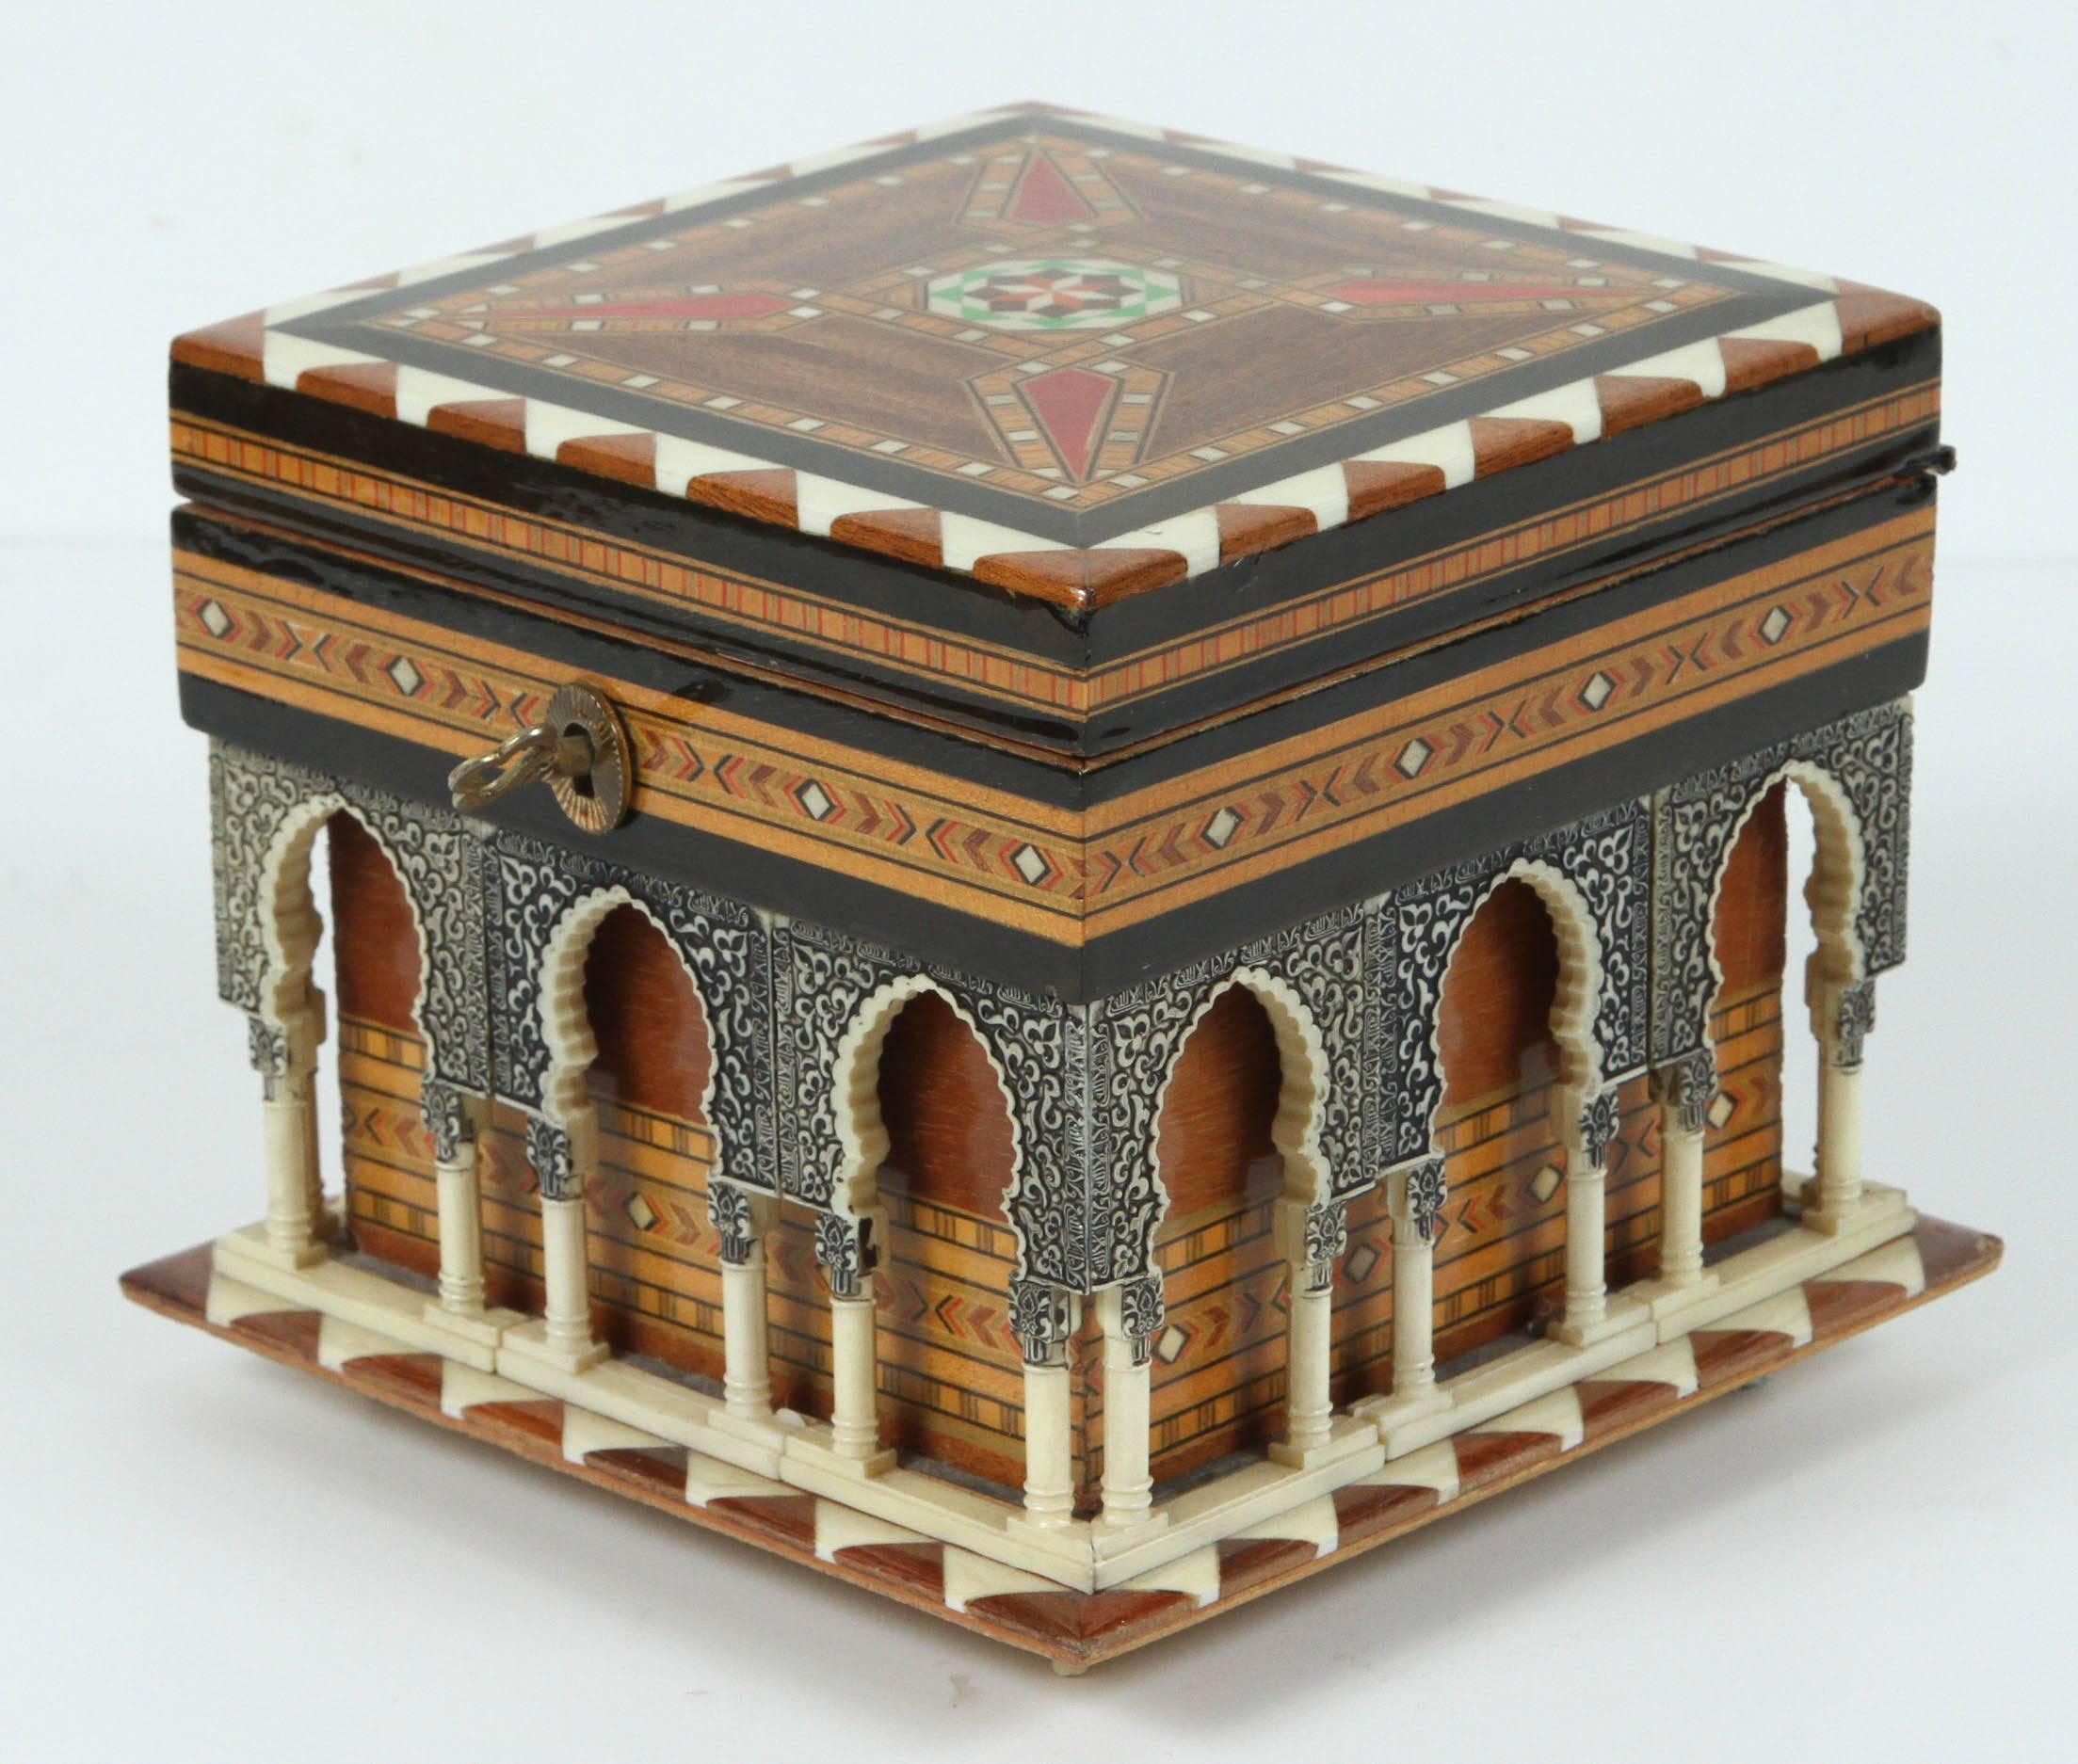 Handmade music box by Victor Molero, handcrafted in Granada, the box represent the Alhambra with Moorish arches, the outside is inlay with bone and marquetry, the inside is lined with red velvet.
The music movement is Swiss and the music is a